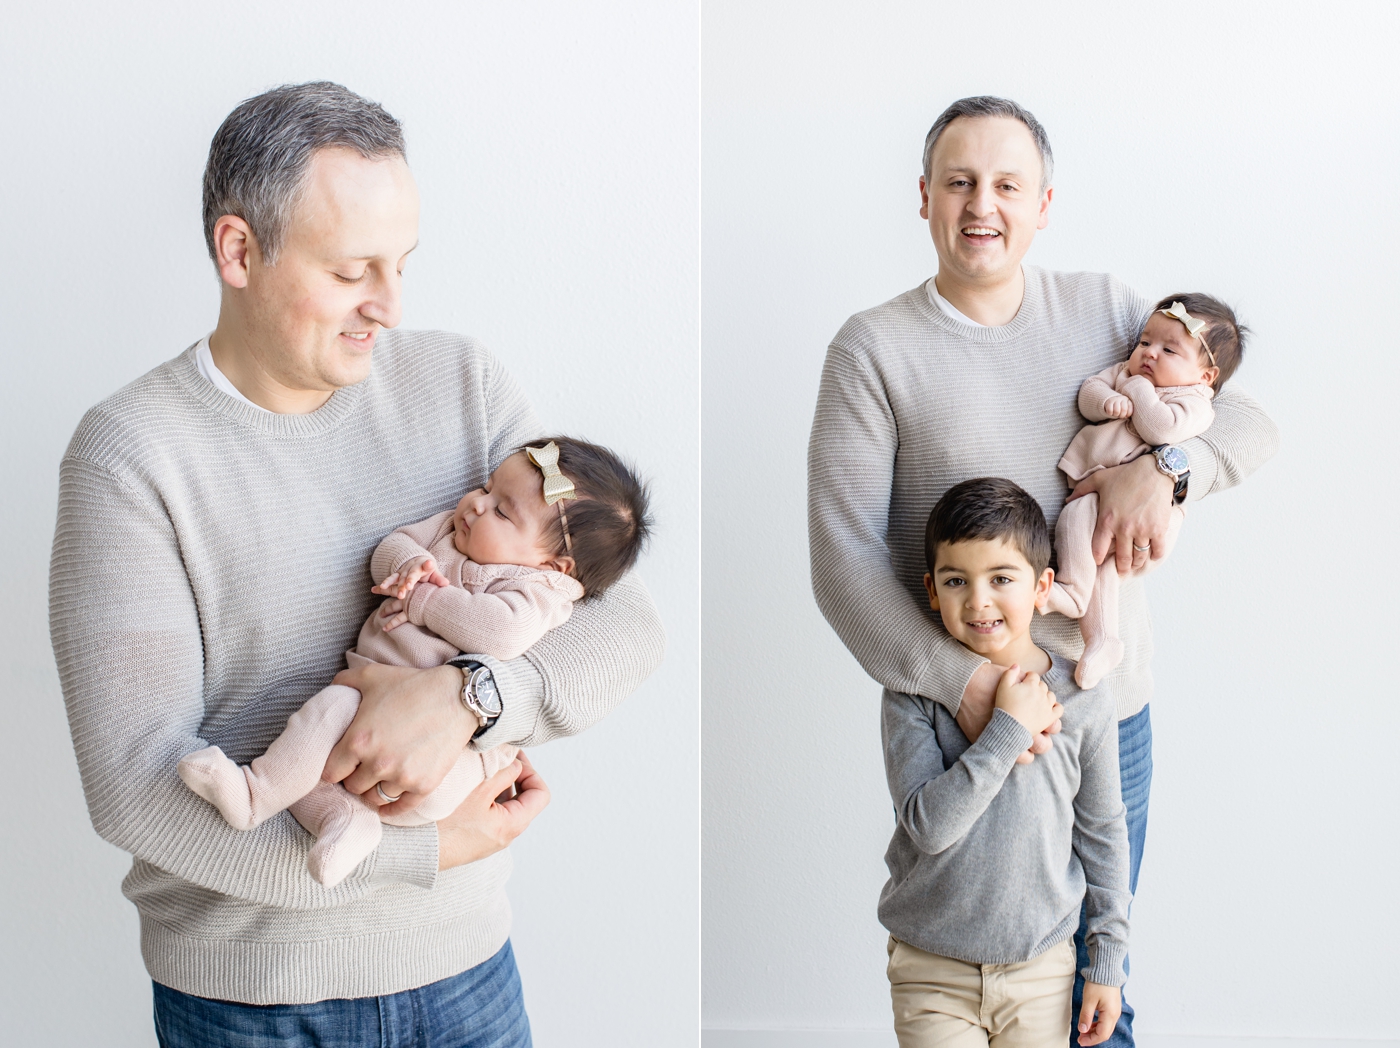 Dad holding baby with big brother in Austin studio by Sana Ahmed Photography.